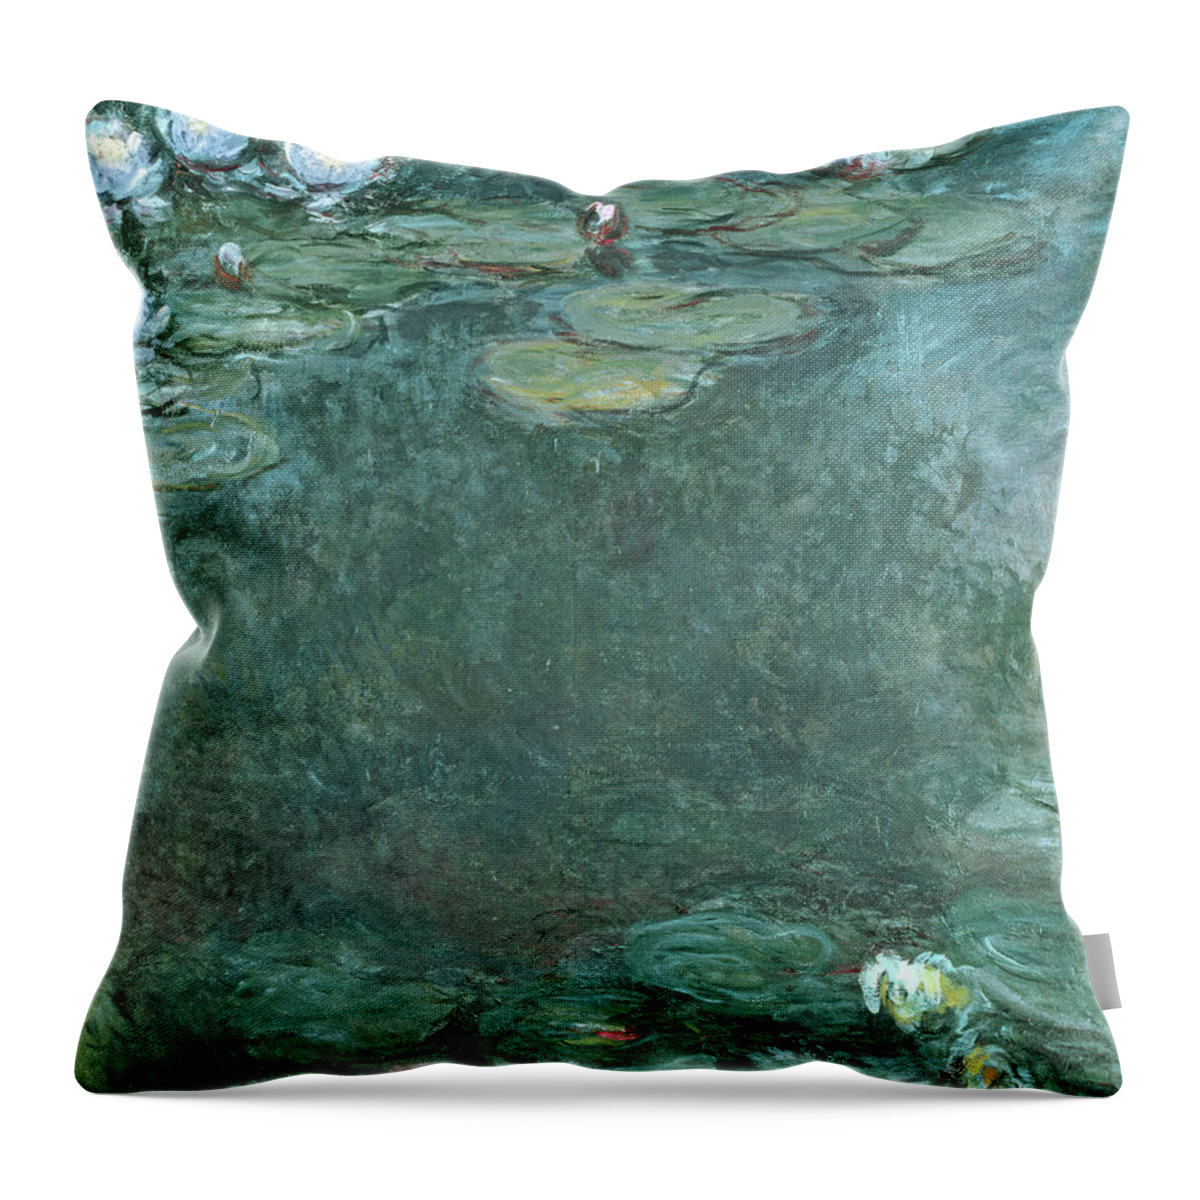 Monet Throw Pillow featuring the painting Water-Lilies by Claude Monet, oil on canvas by Claude Monet